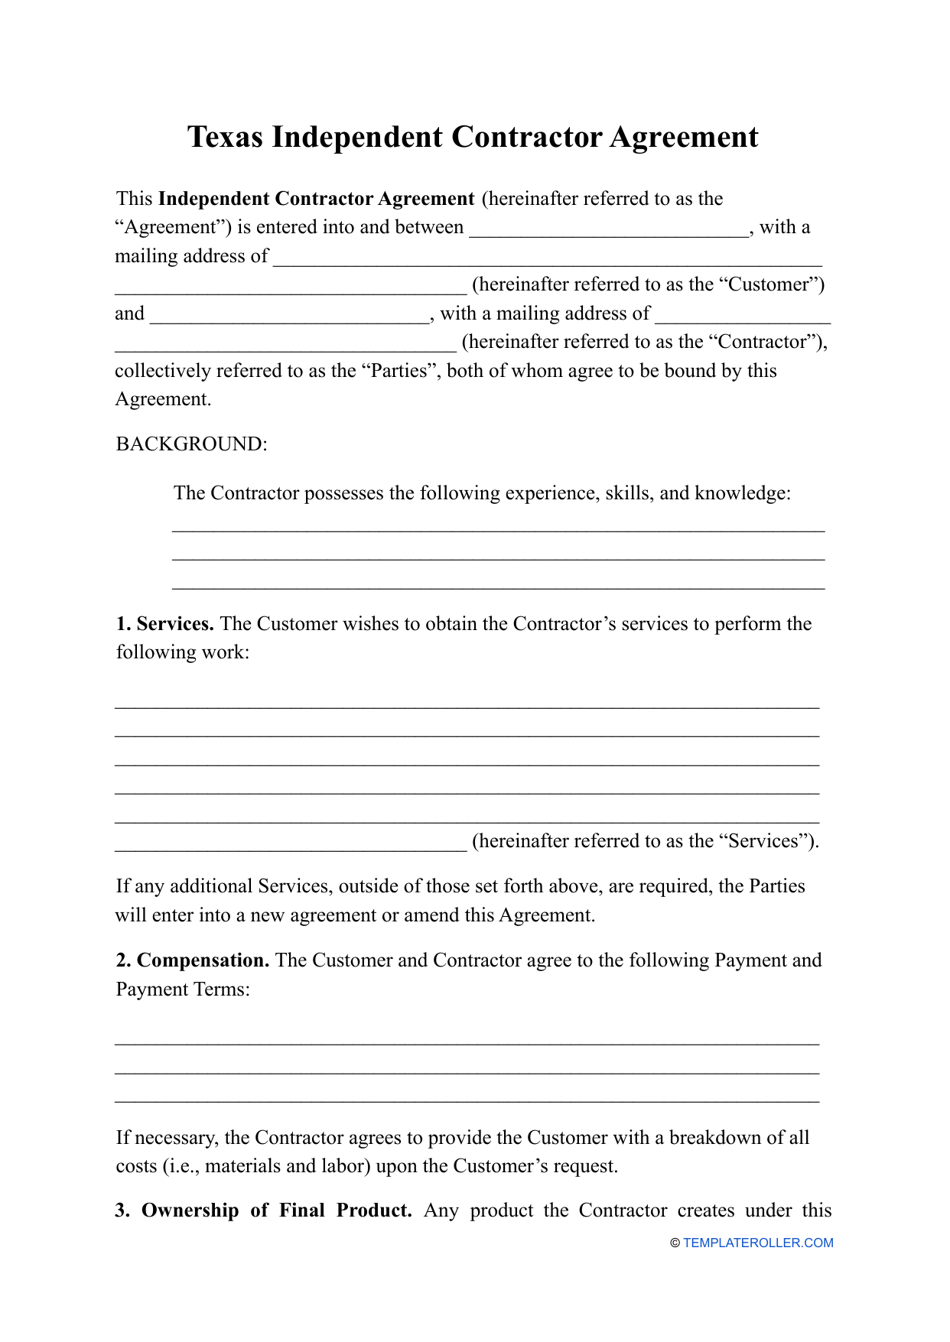 Independent Contractor Agreement Template - Texas, Page 1